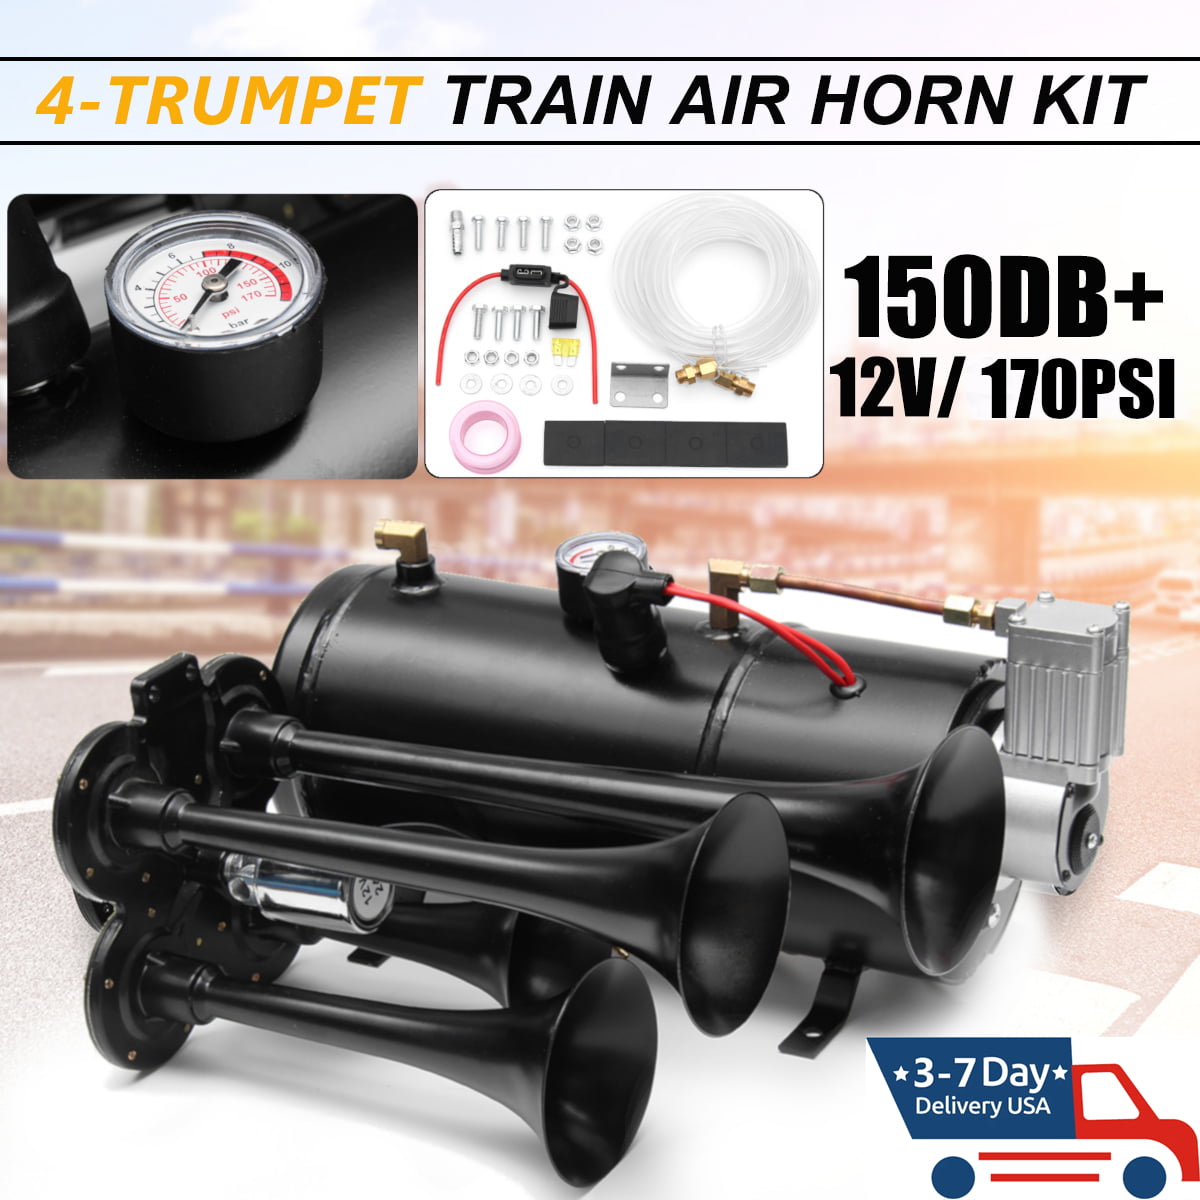 150 DB Train Horn With Air Compressor Last two days-70%OFF 